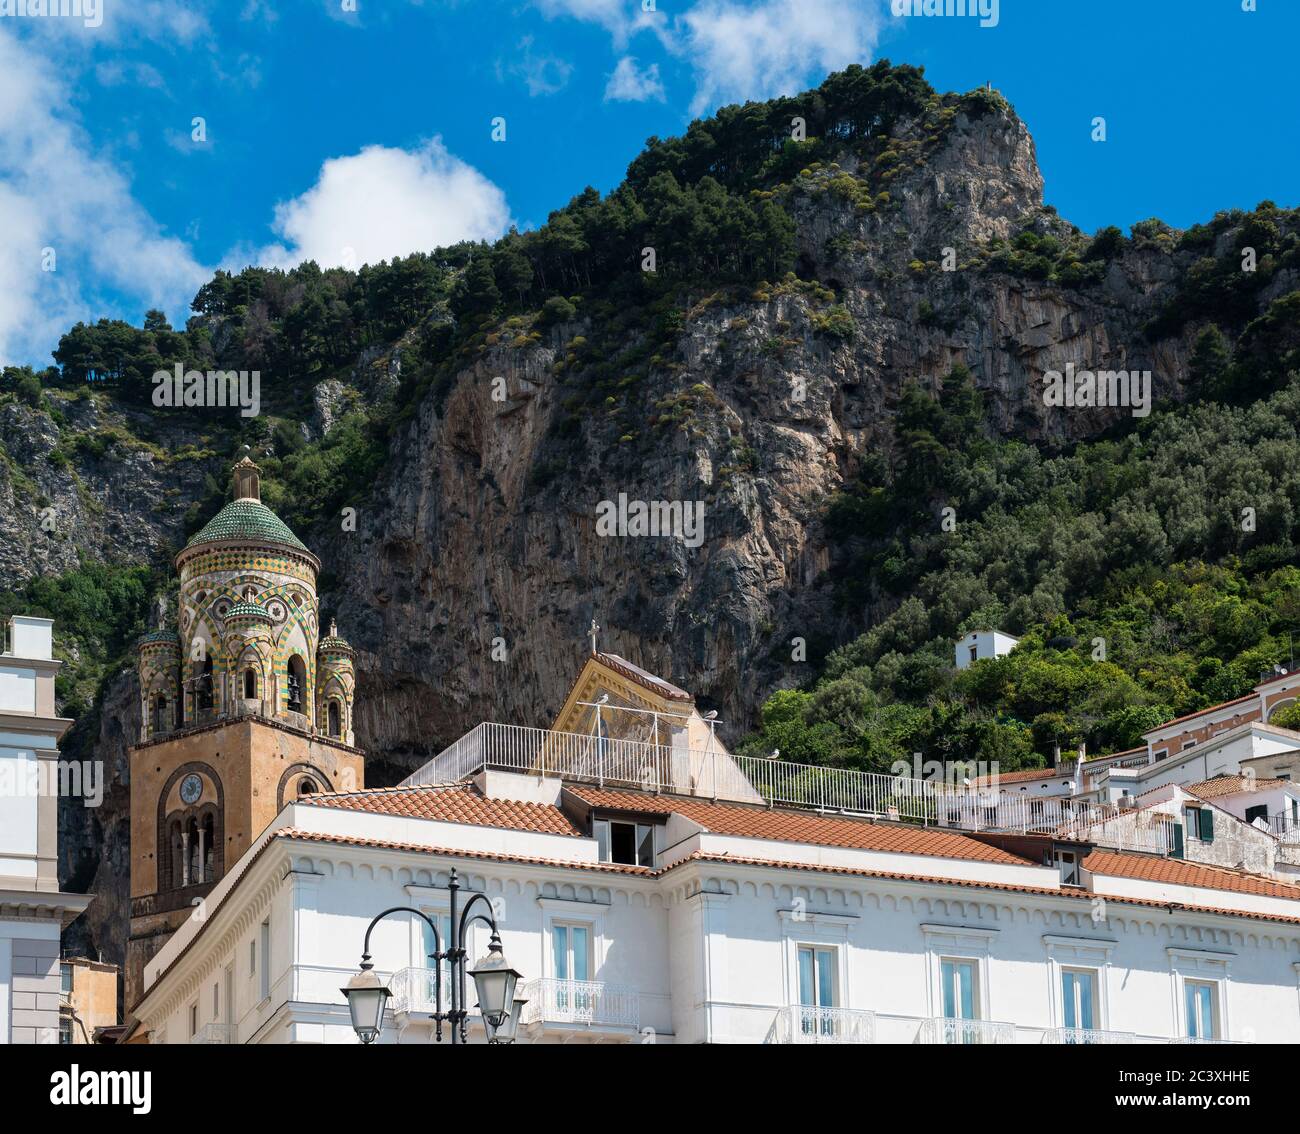 View of Amalfi with Dome of Saint Andrew's Cathedral, Amalfi, Amalfi ...